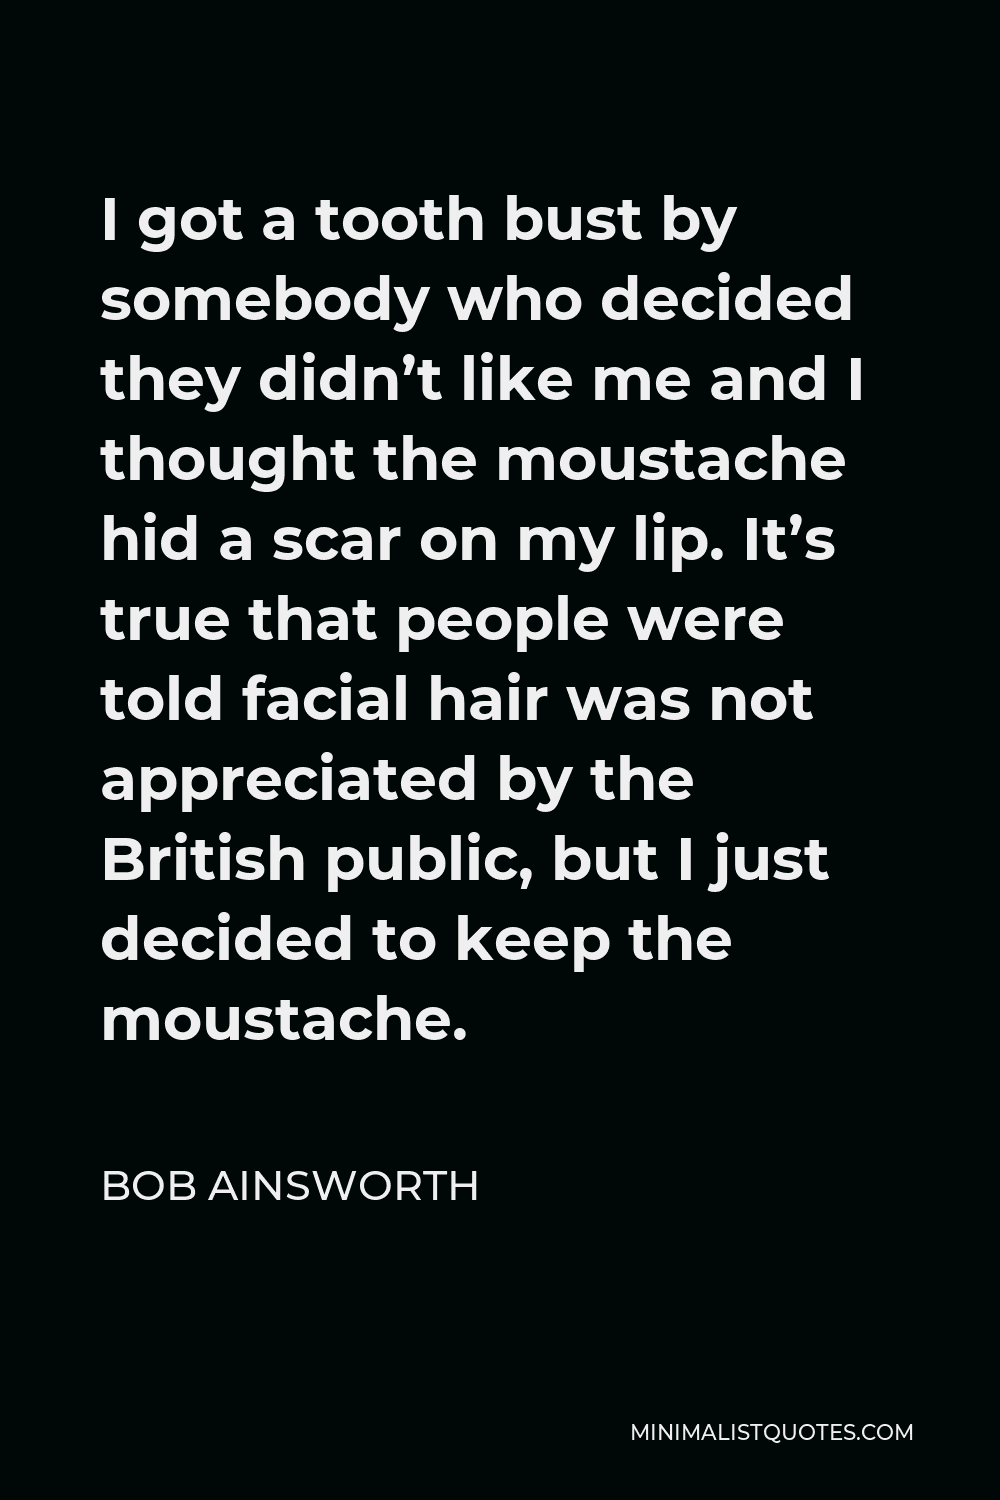 Bob Ainsworth Quote - I got a tooth bust by somebody who decided they didn’t like me and I thought the moustache hid a scar on my lip. It’s true that people were told facial hair was not appreciated by the British public, but I just decided to keep the moustache.